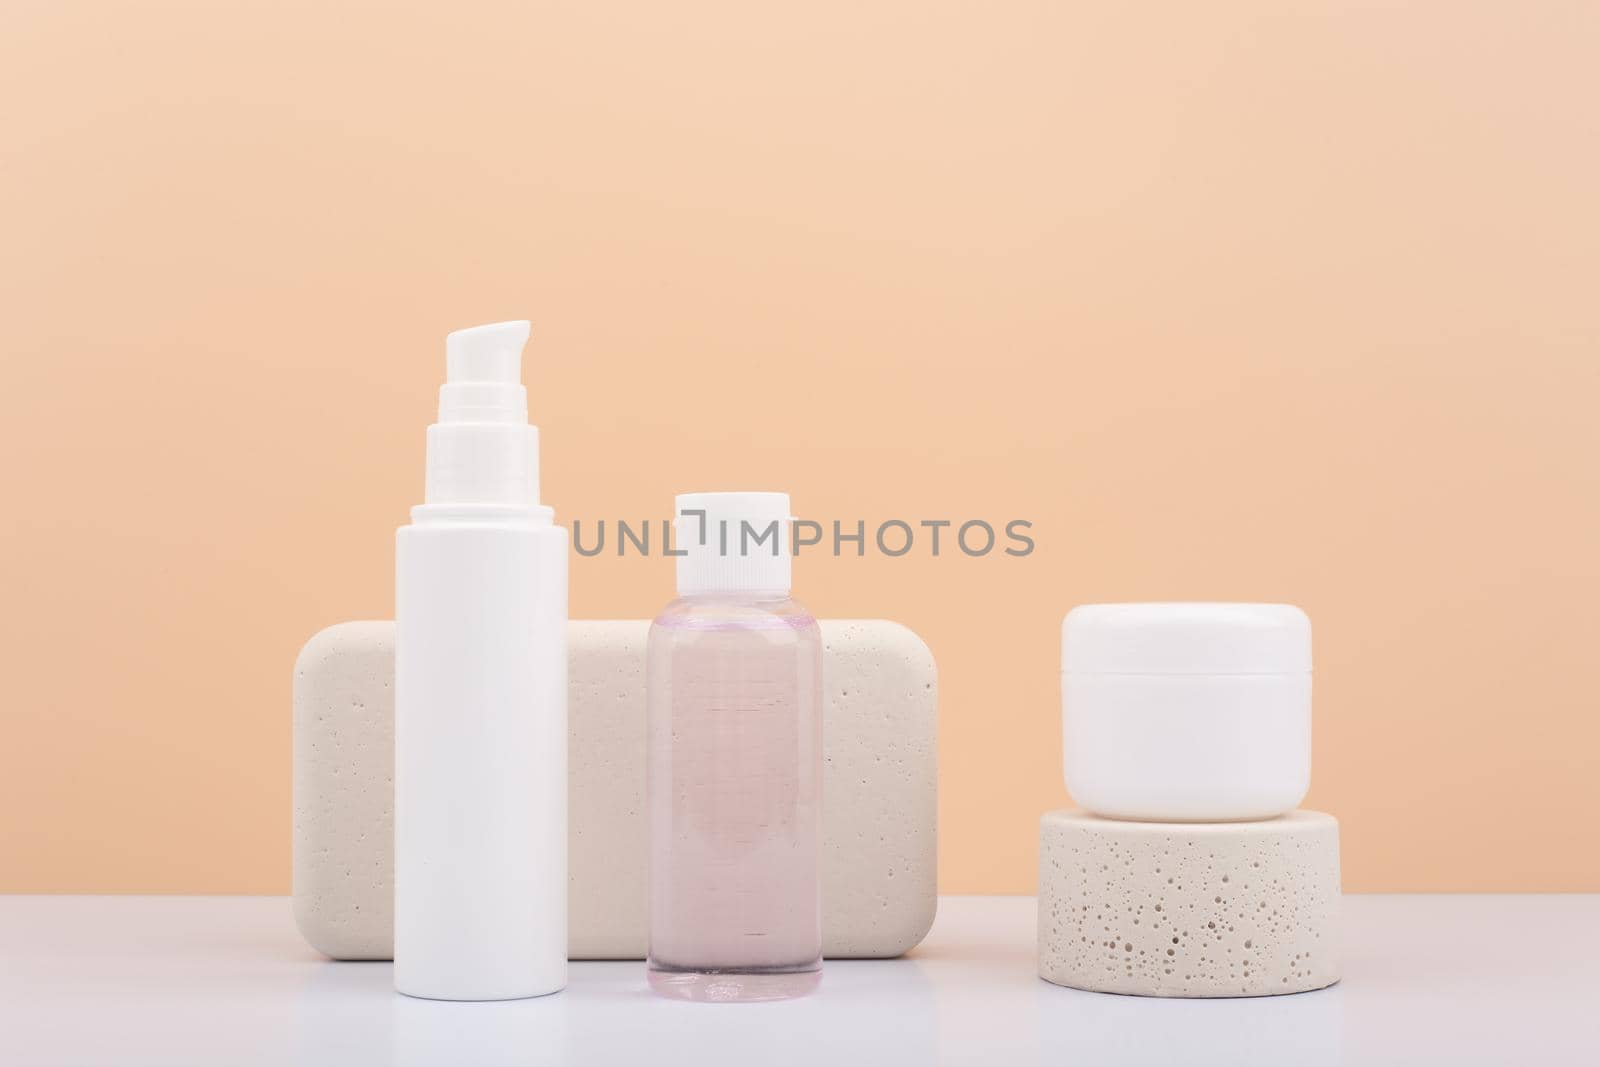 Set of natural organic beauty products for daily skin care with beige podiums against beige background. by Senorina_Irina